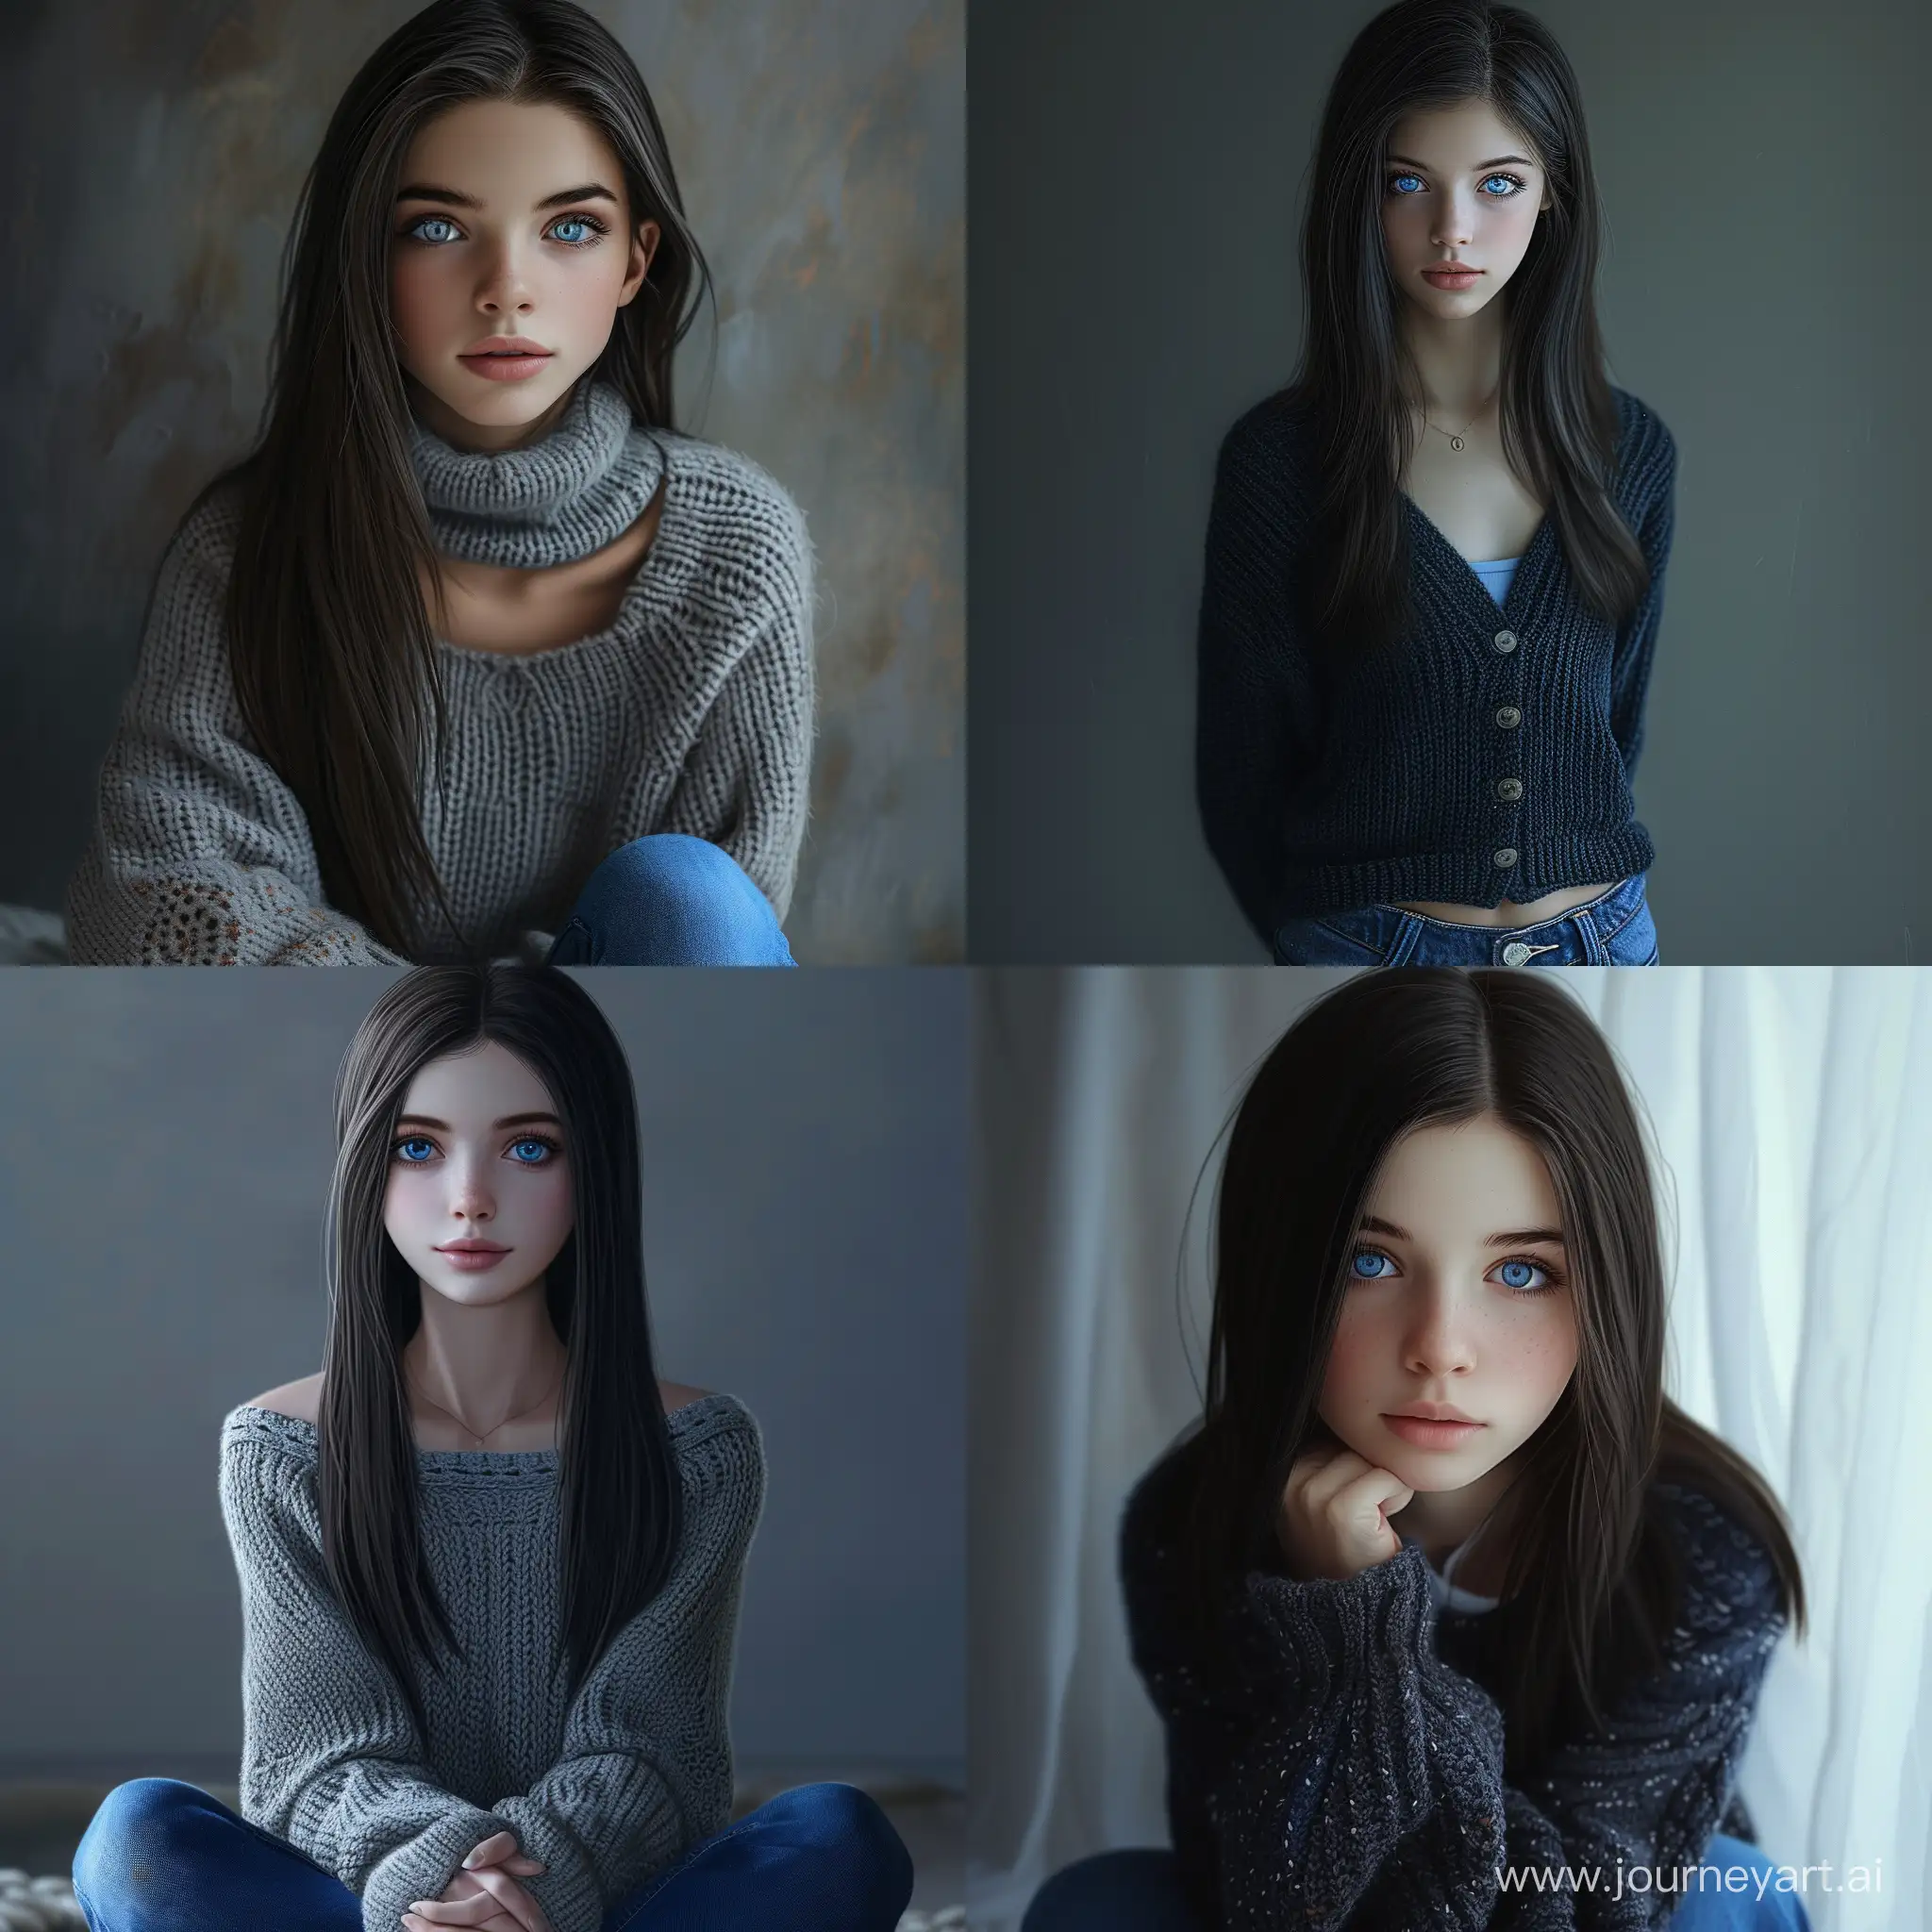 Teenage-Girl-in-Knitted-Cardigan-and-Blue-Jeans-Realistic-Portrait-Art